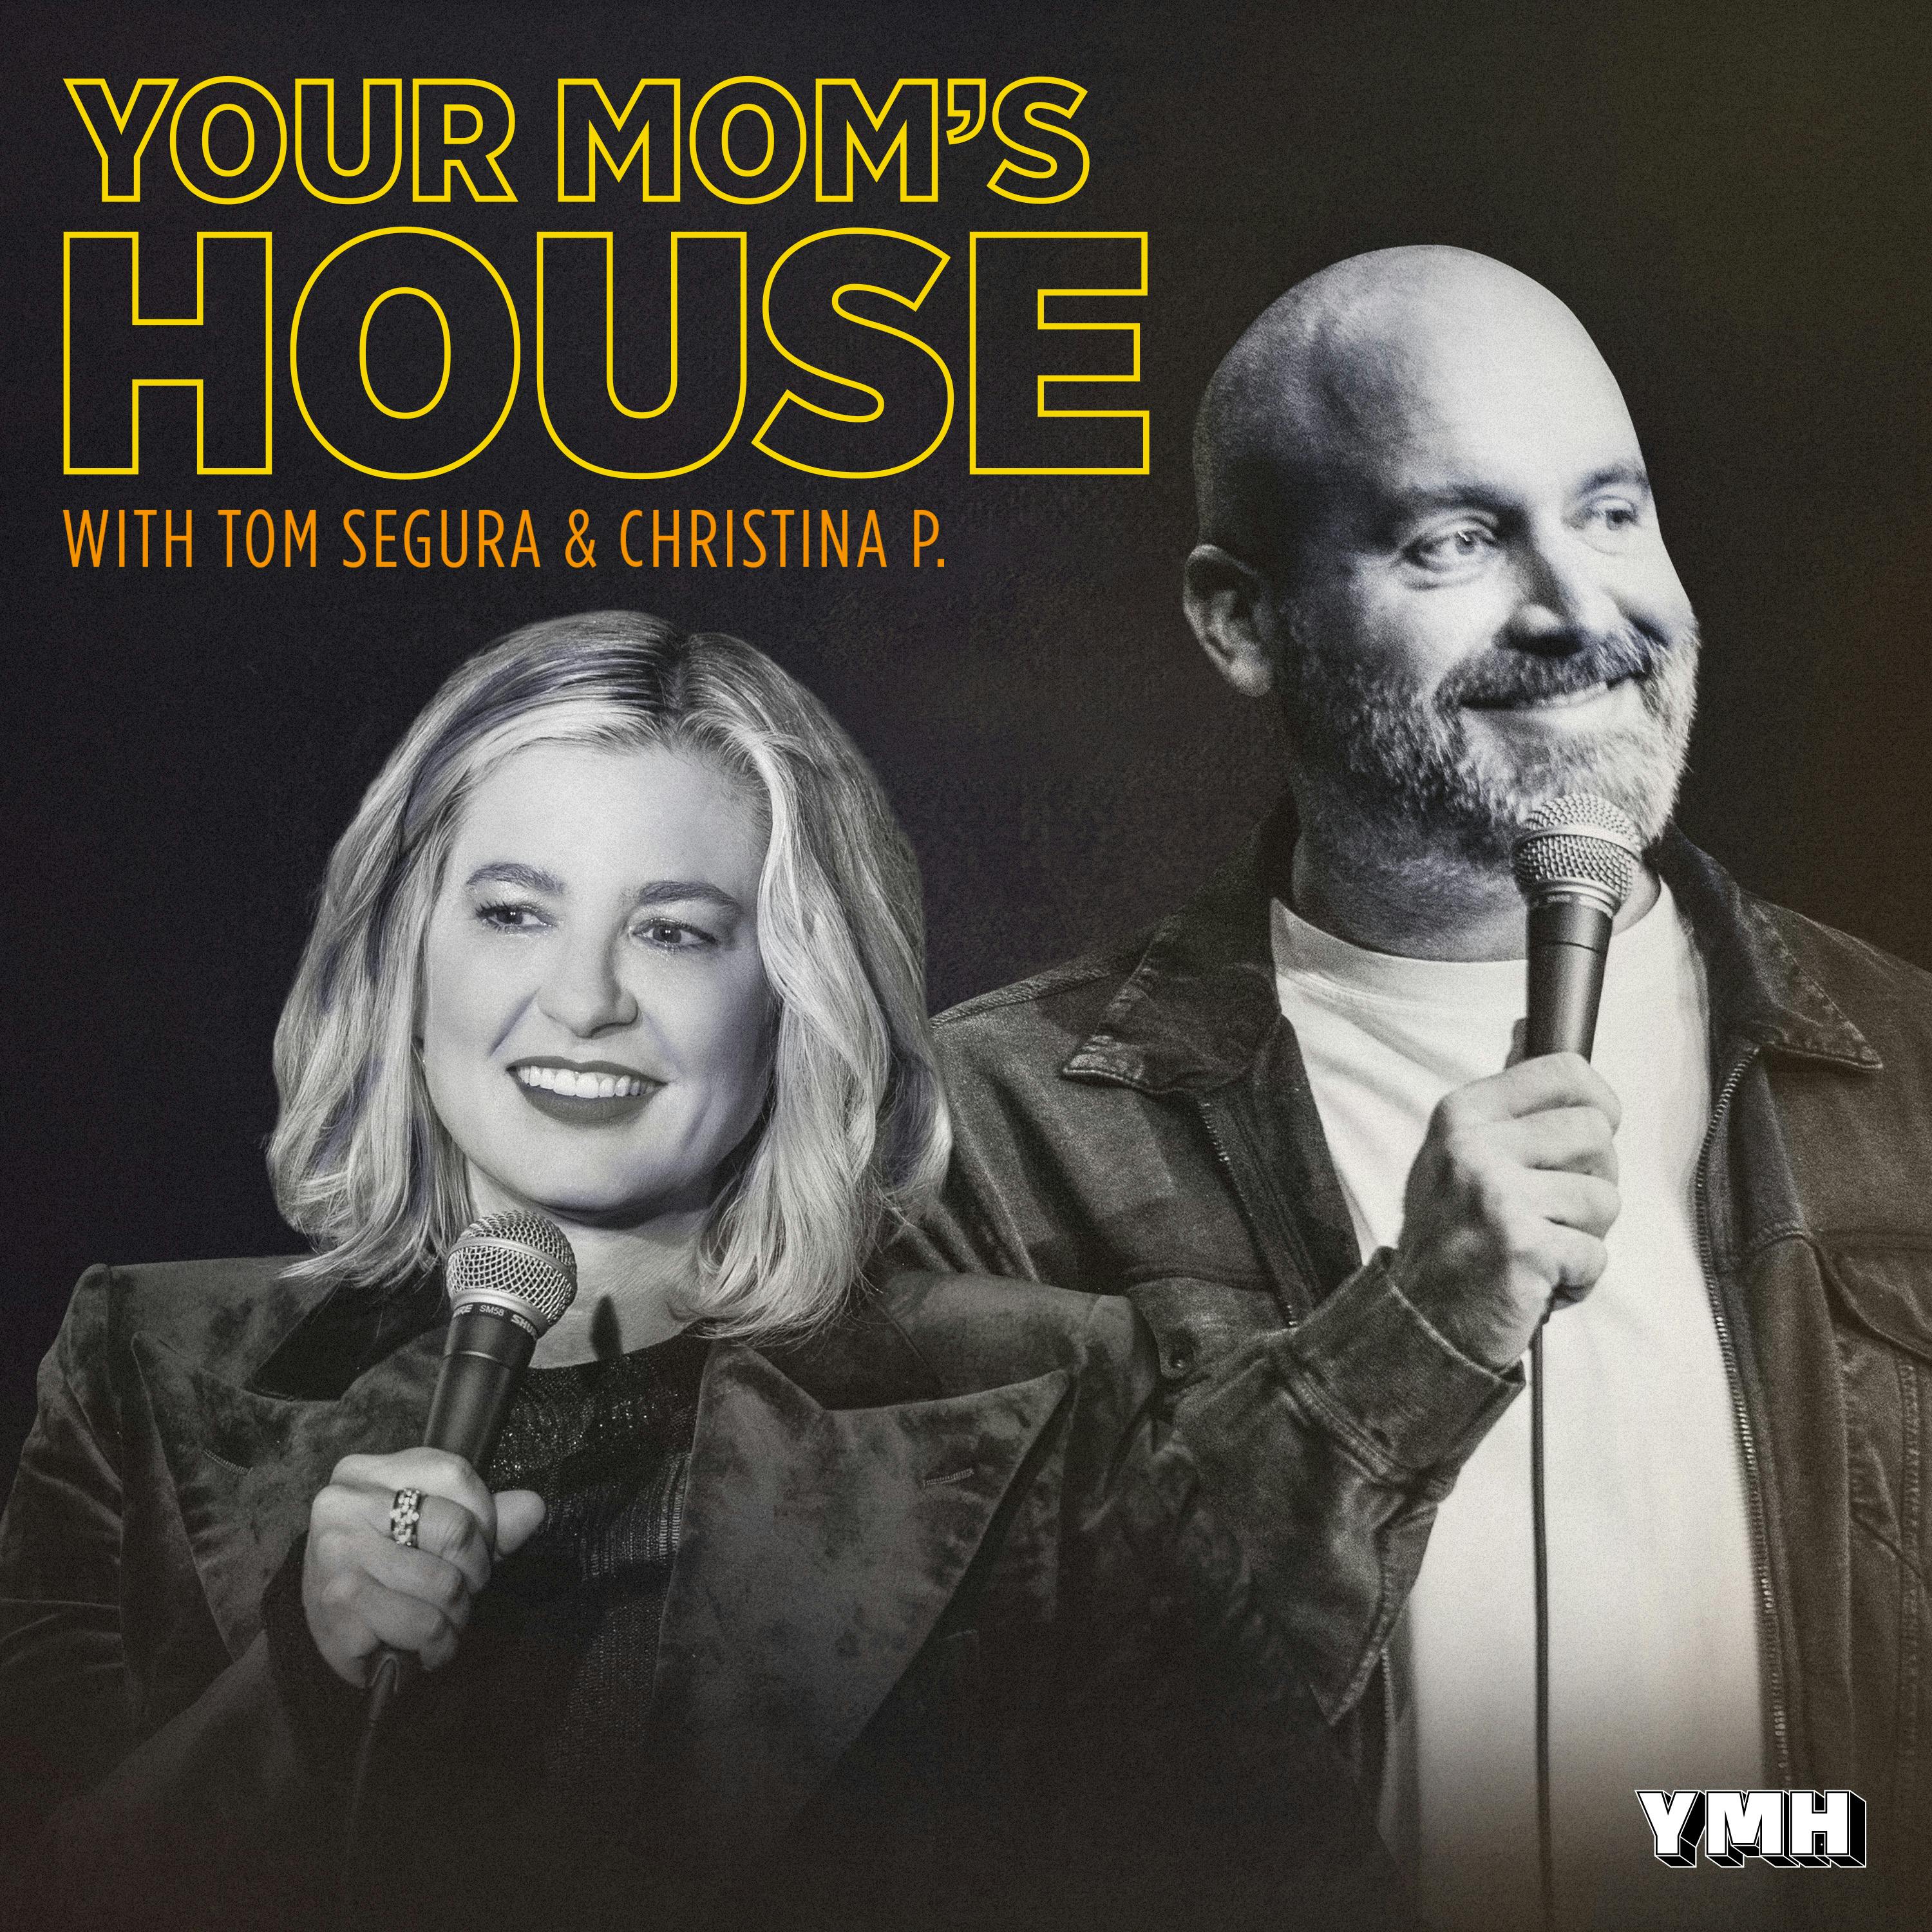 Happy HallowJeans! w/ Jimmy Carr | Your Mom's House Ep. 732